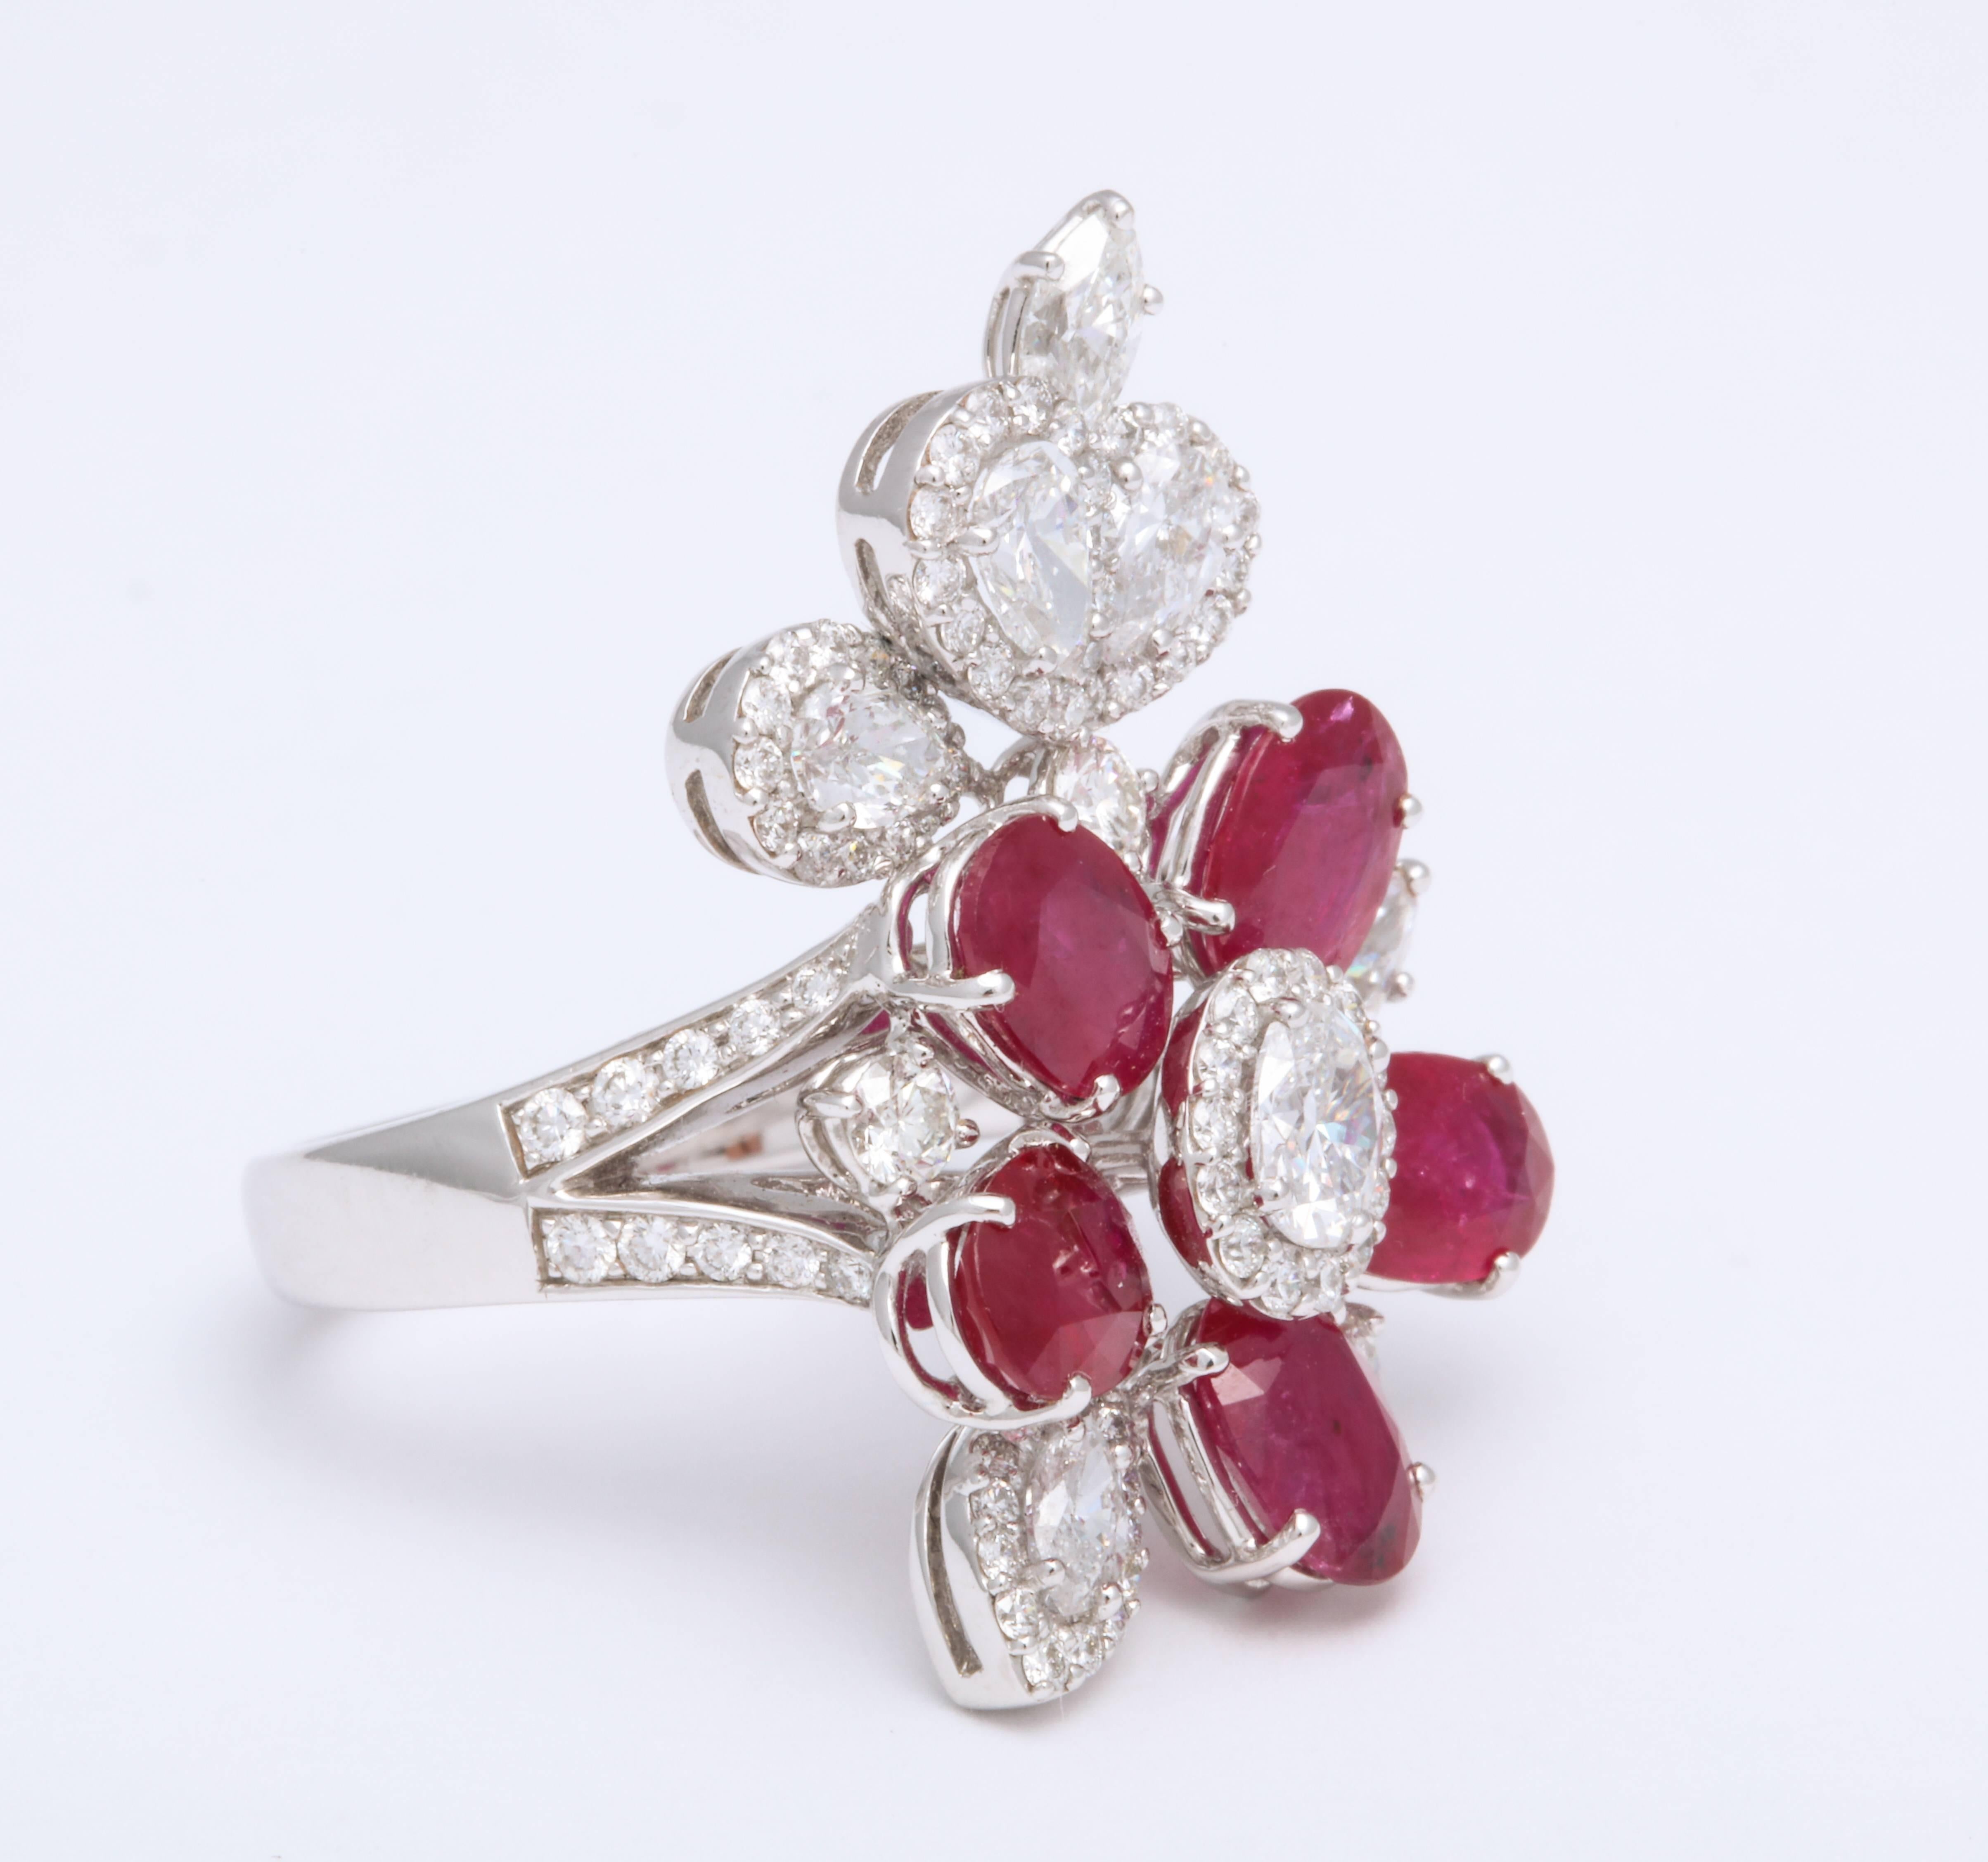 18K white gold free-form foliate ring mounted with pop color oval faceted rubies: 4.47 carats, decorated with diamond pear shapes, marquise, oval and round brilliant cut diamonds: 2.53 carats combined. 